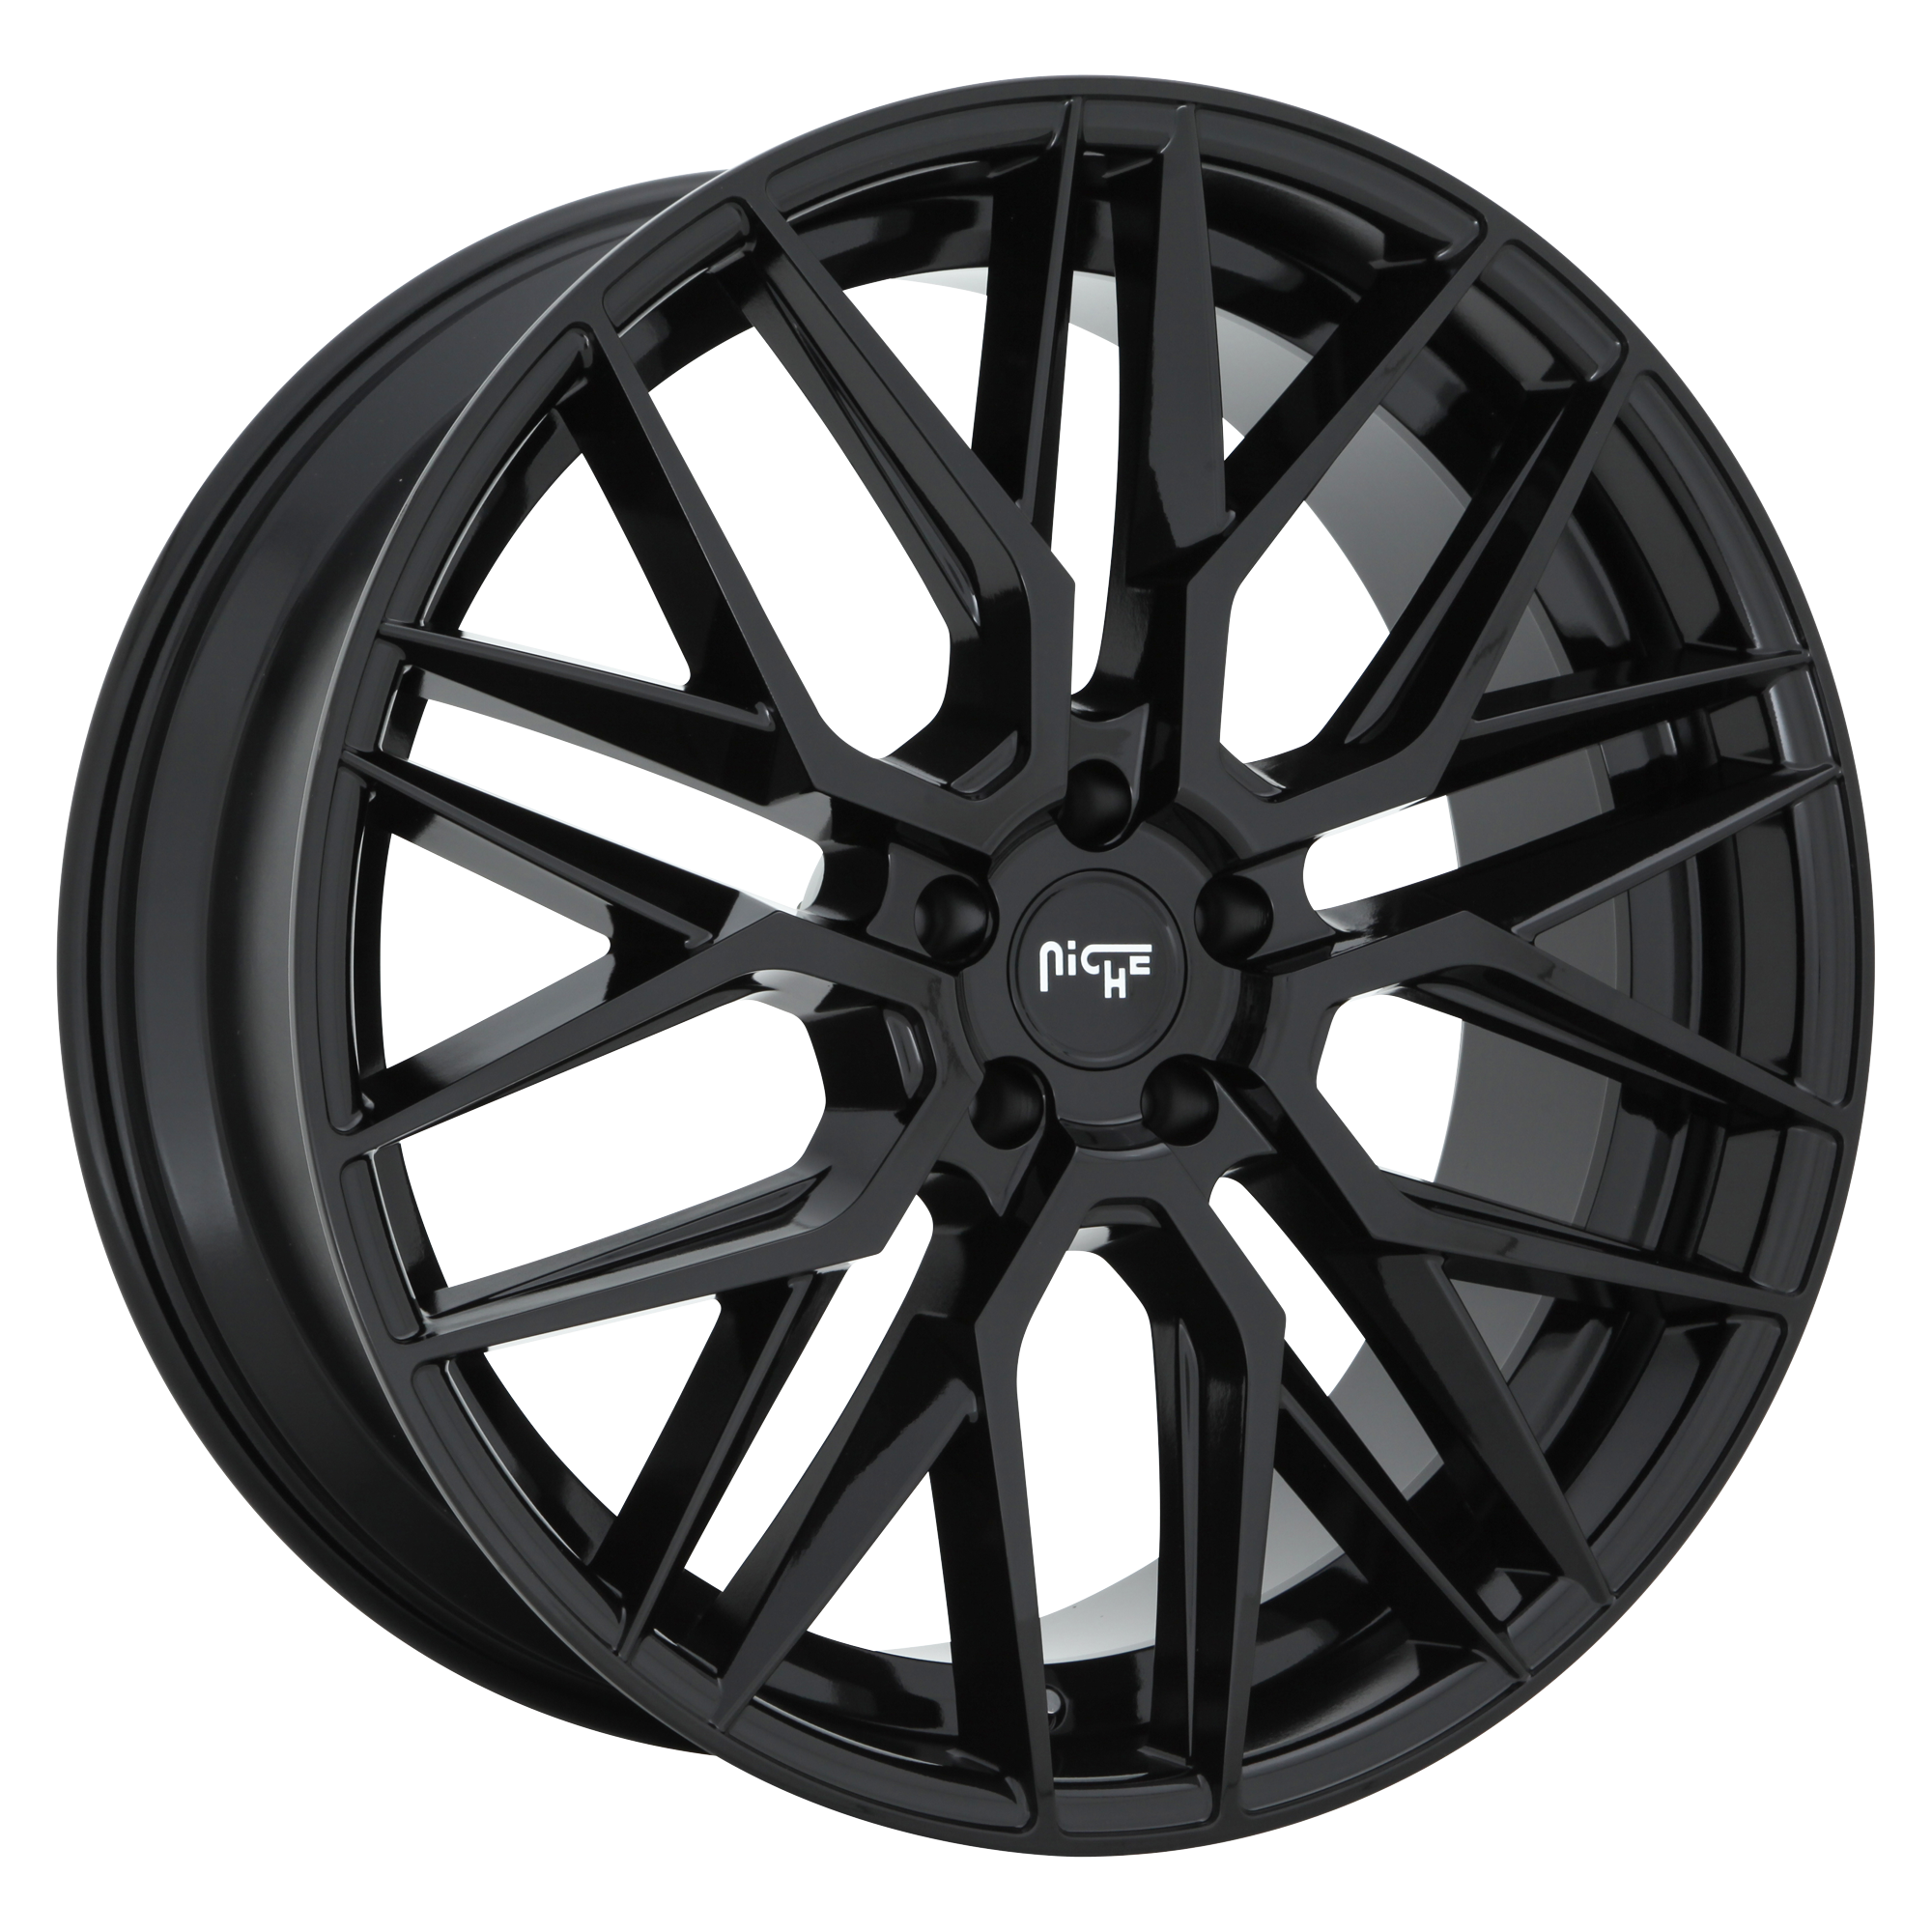 GAMMA 24x10 5x120.00 GLOSS BLACK (35 mm) - Tires and Engine Performance